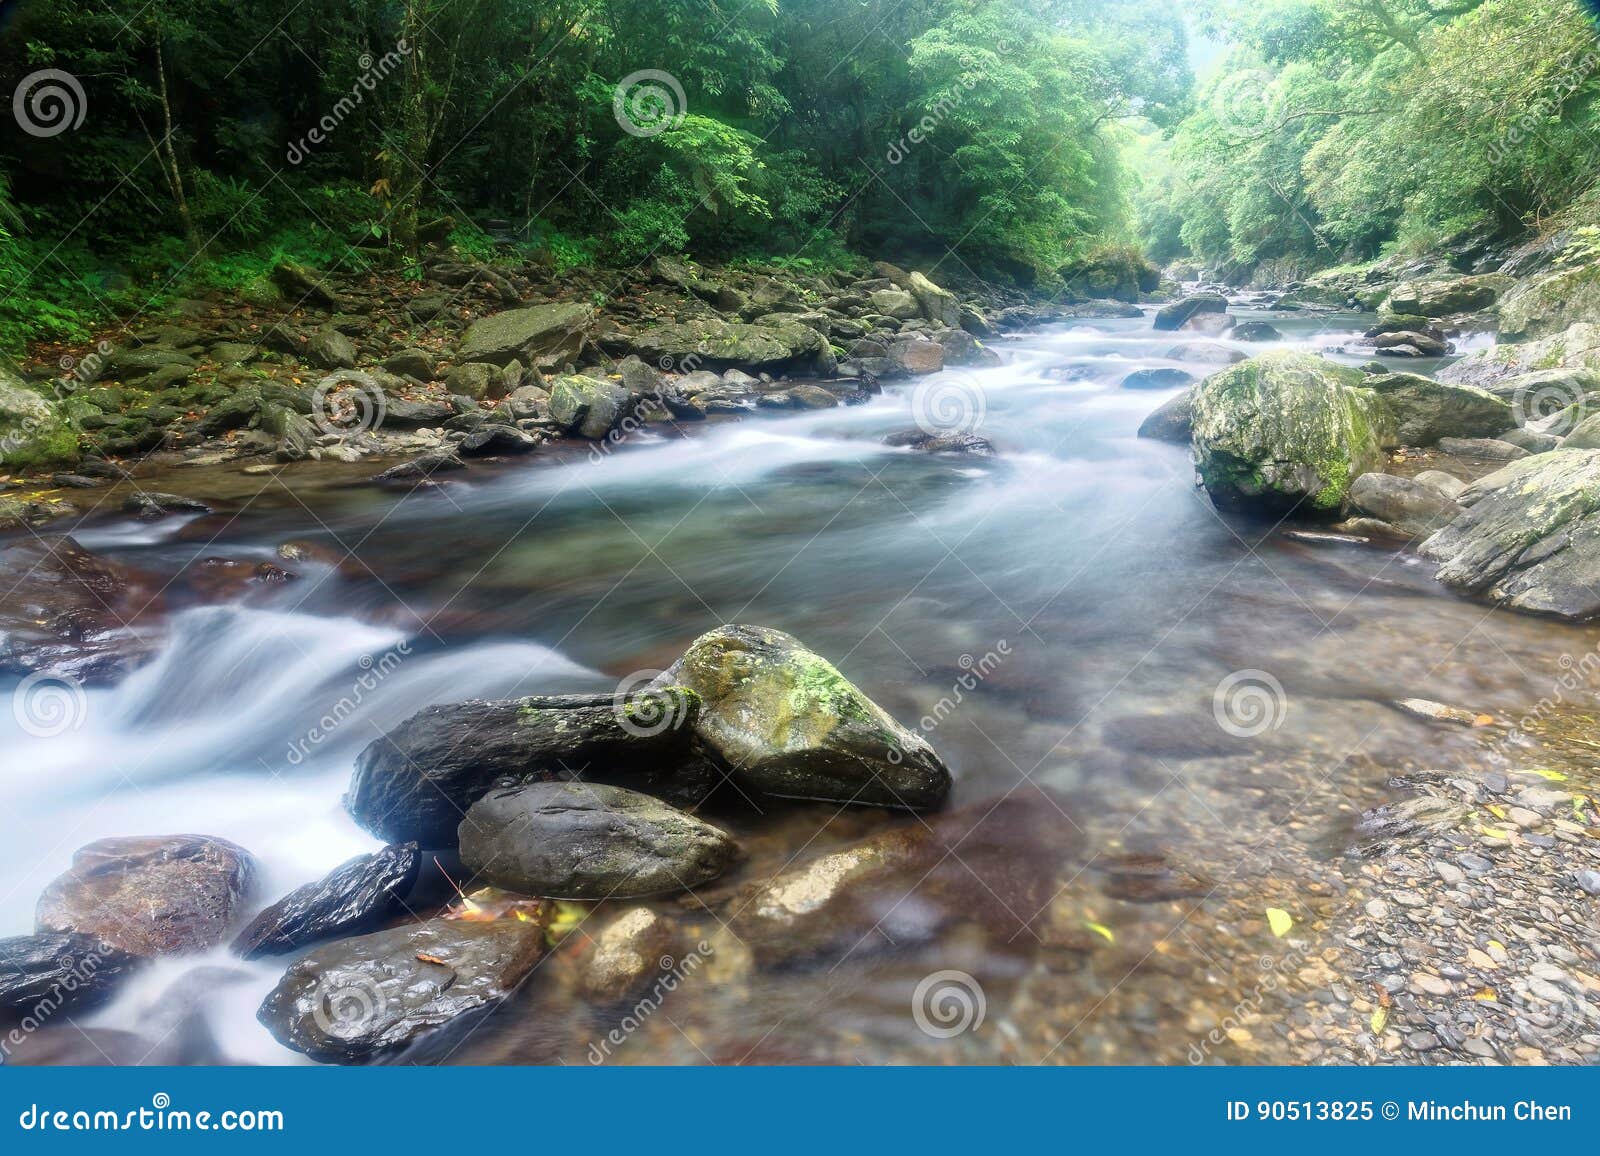 A Rapid Stream Flowing Through A Mysterious Forest Of Lush Greenery